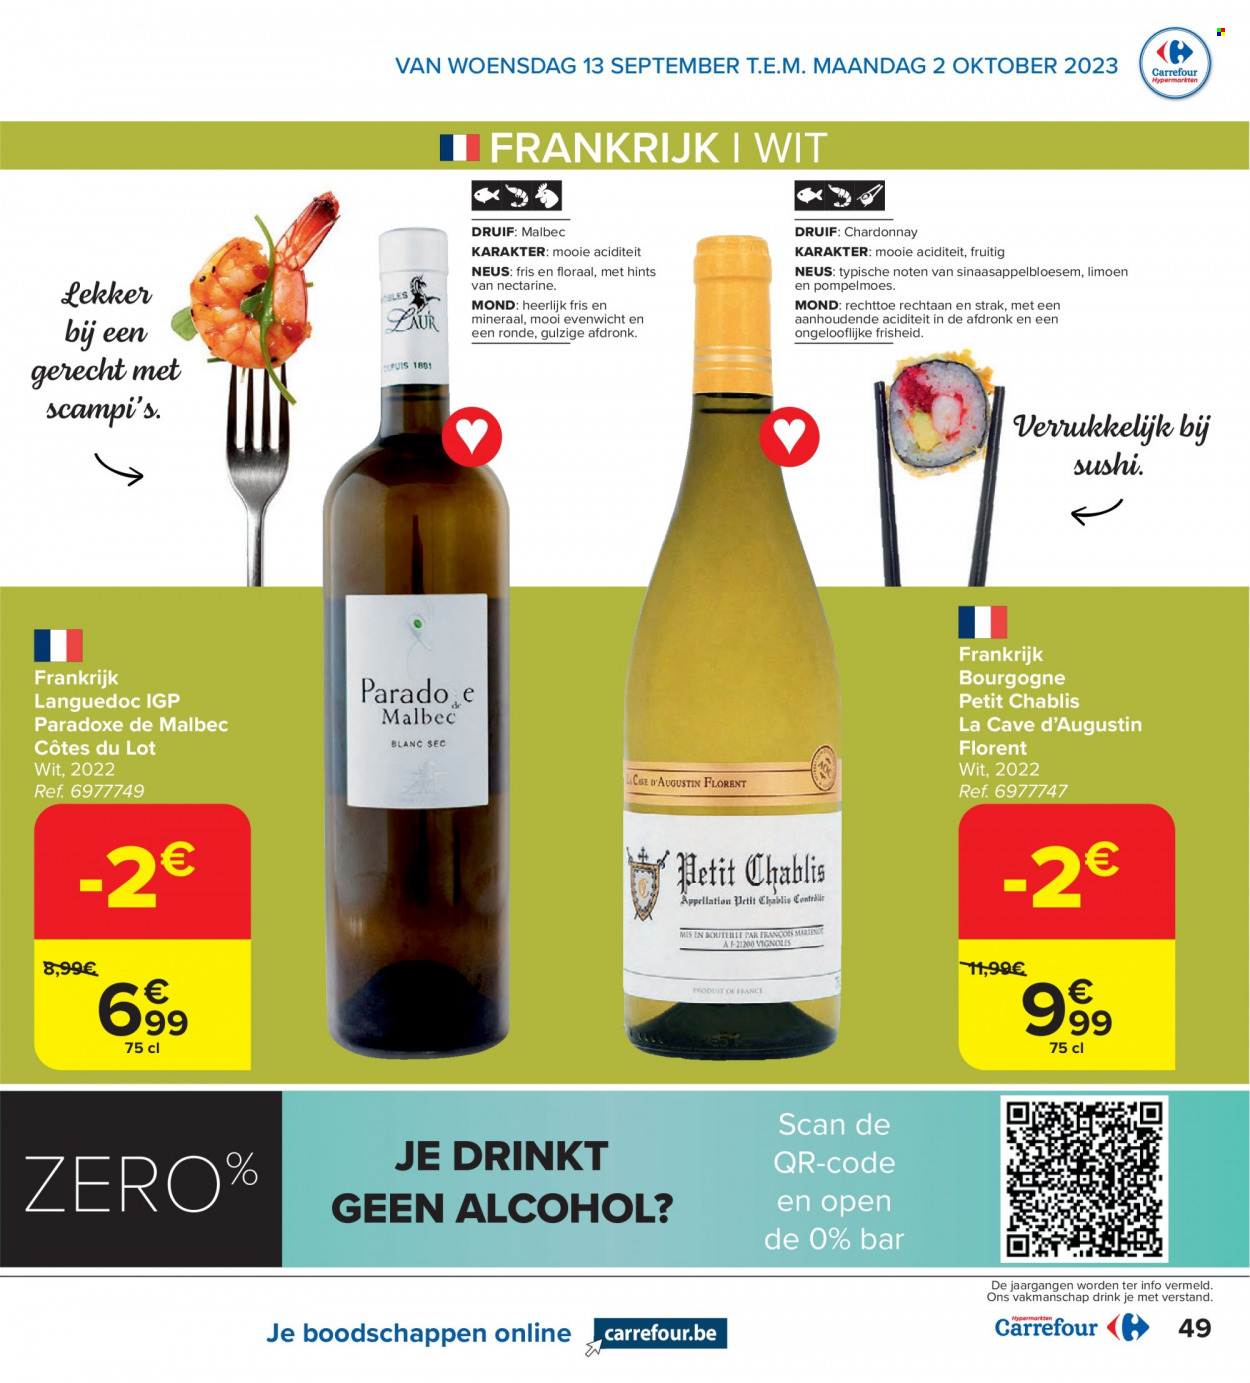 Catalogue Carrefour hypermarkt - 13.9.2023 - 2.10.2023. Page 21.